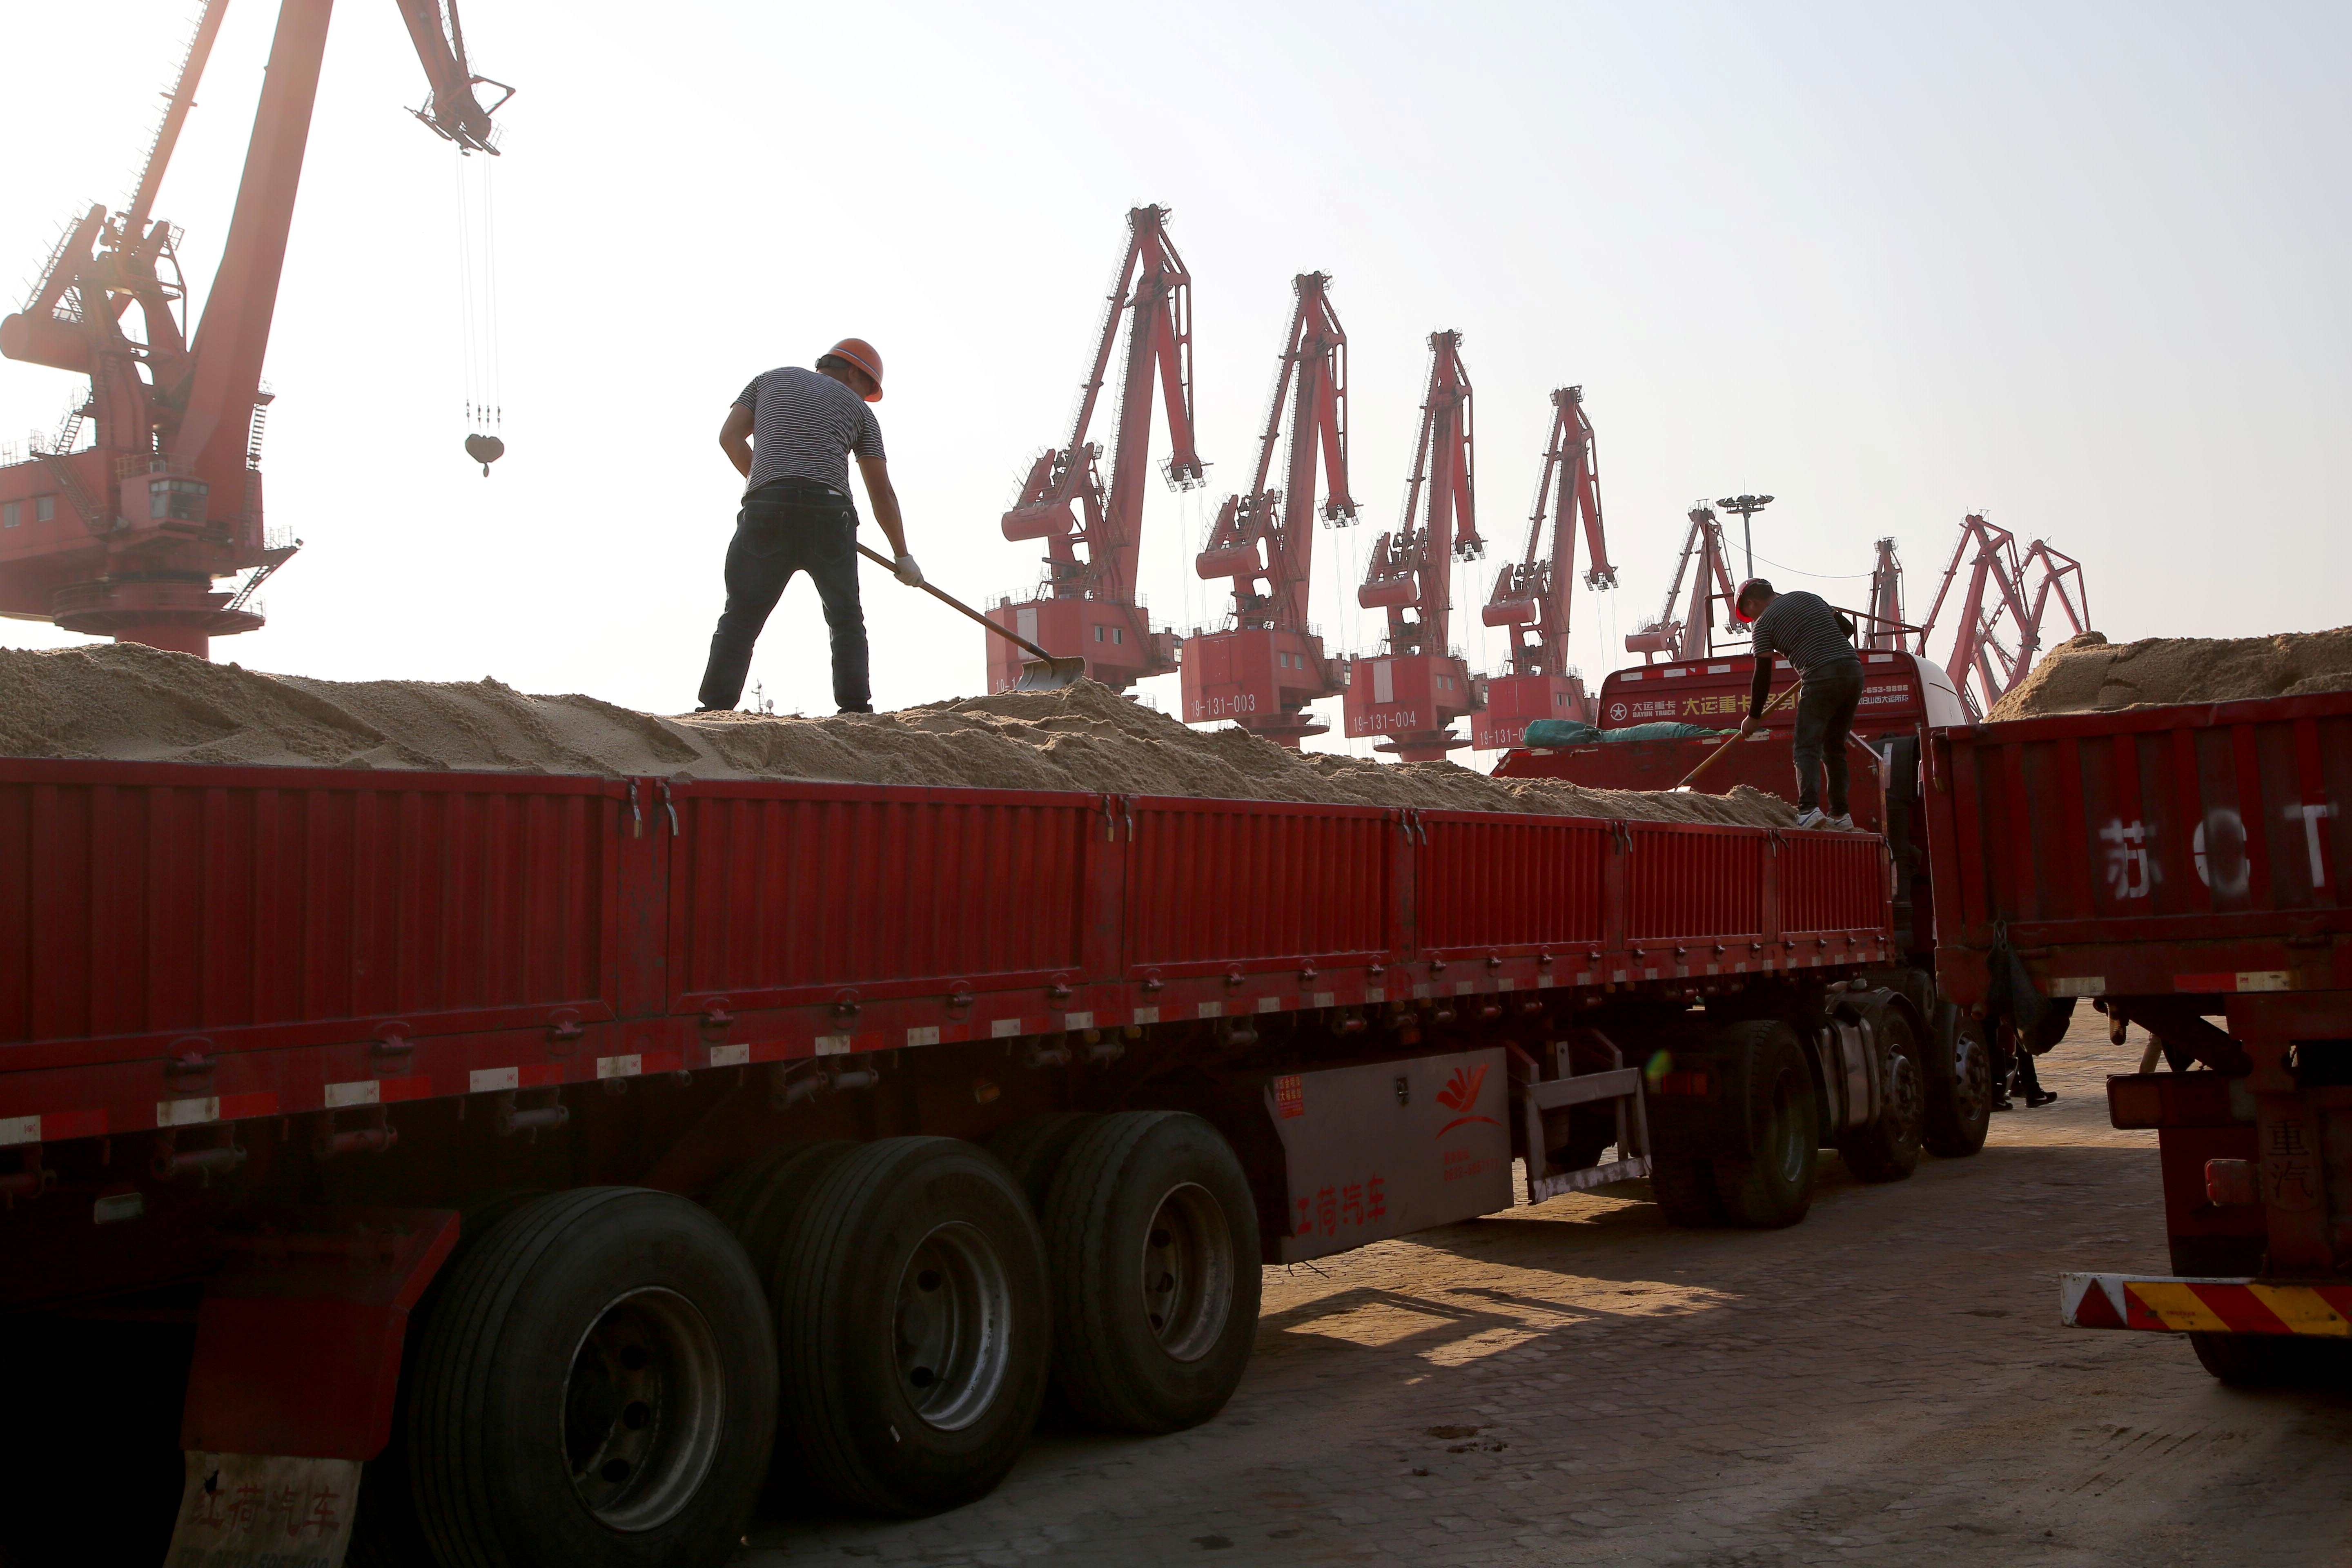 Men work on transporting nickel laterite ore on a truck at Ganyu port in Lianyungang